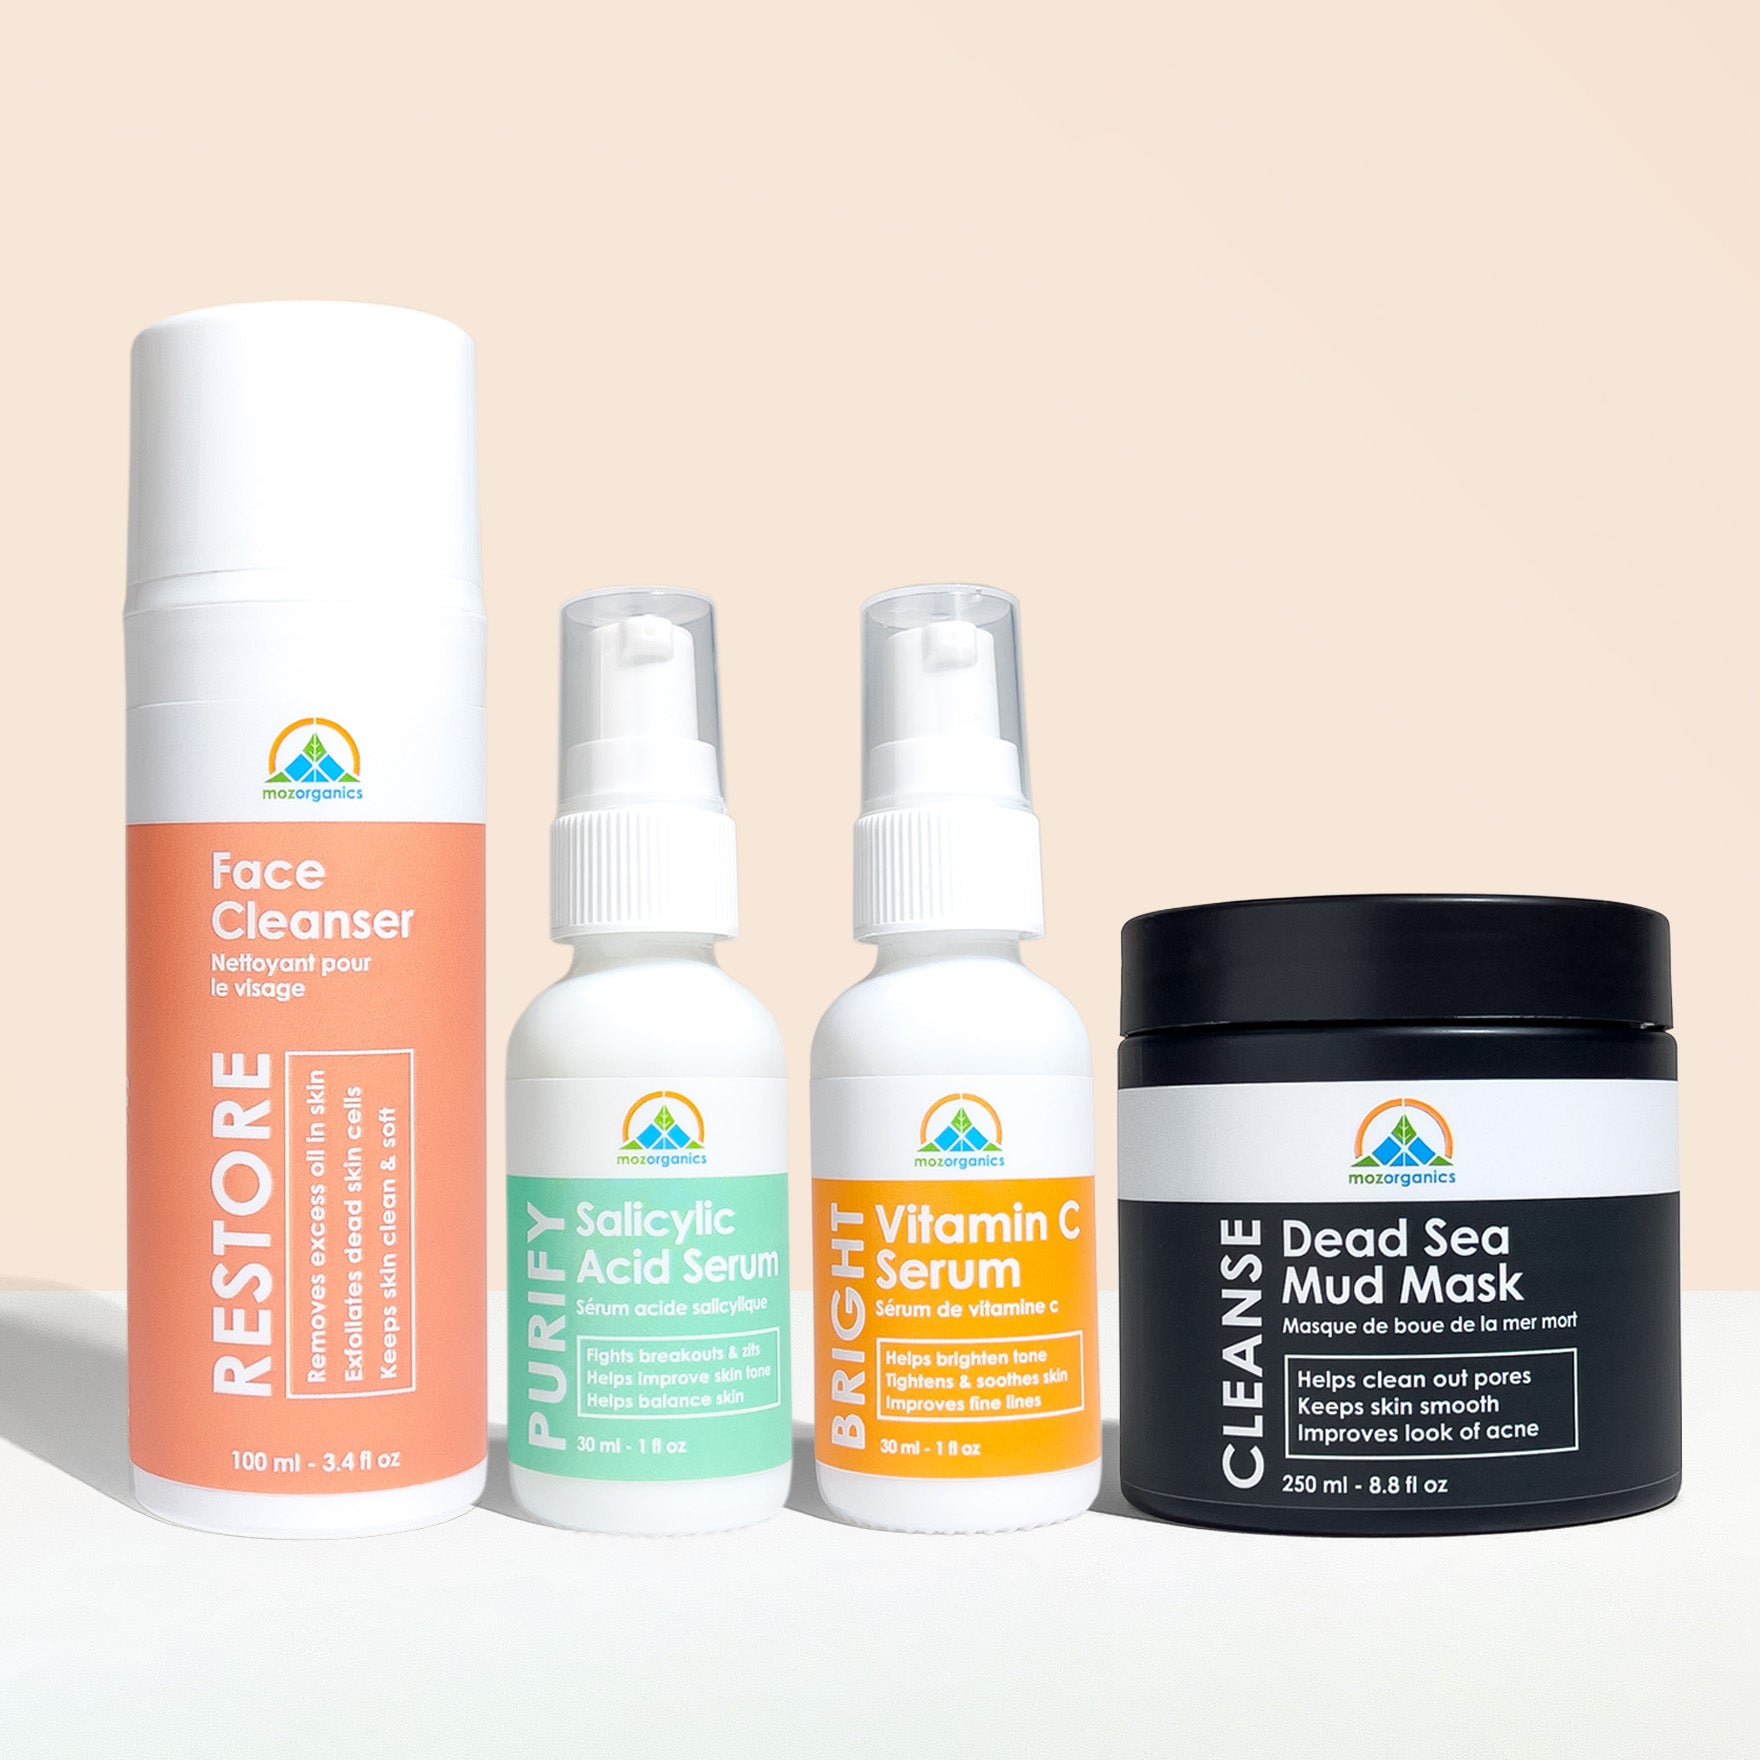 The Clear Set skincare collection for acne-prone skin with natural ingredients